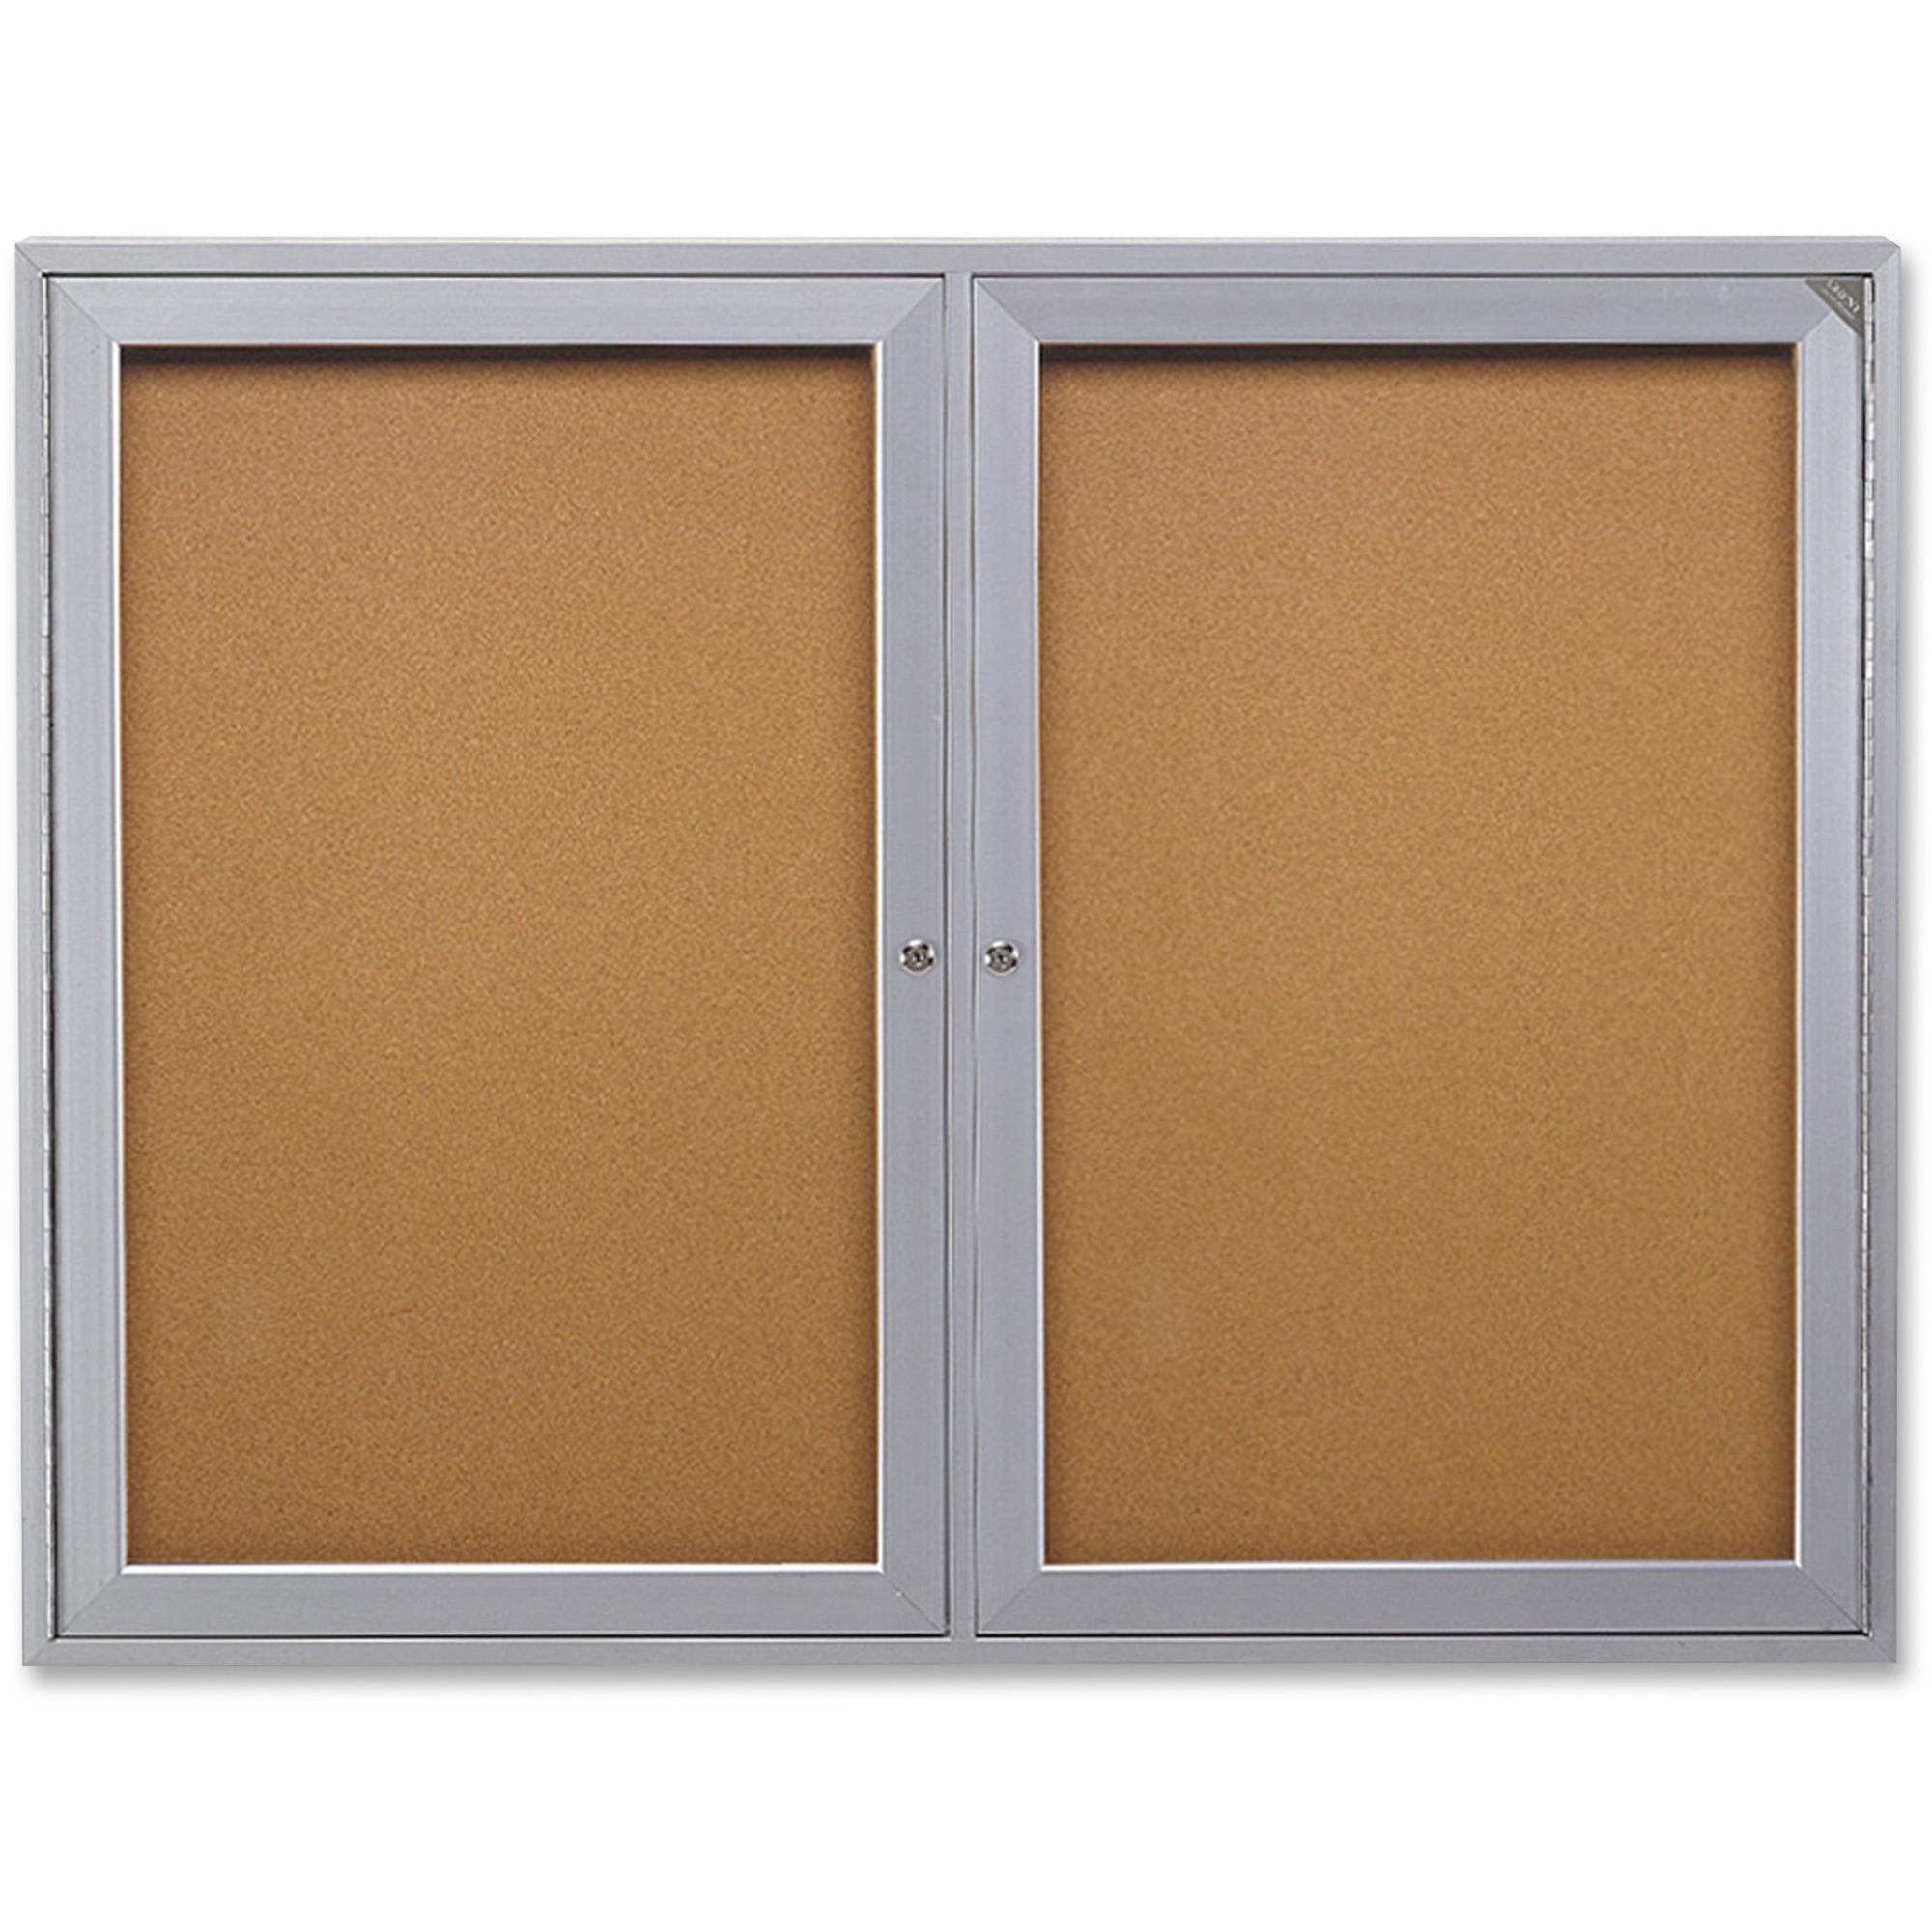 Ghent 2 Door Enclosed Indoor Bulletin Board Madill The Office Company